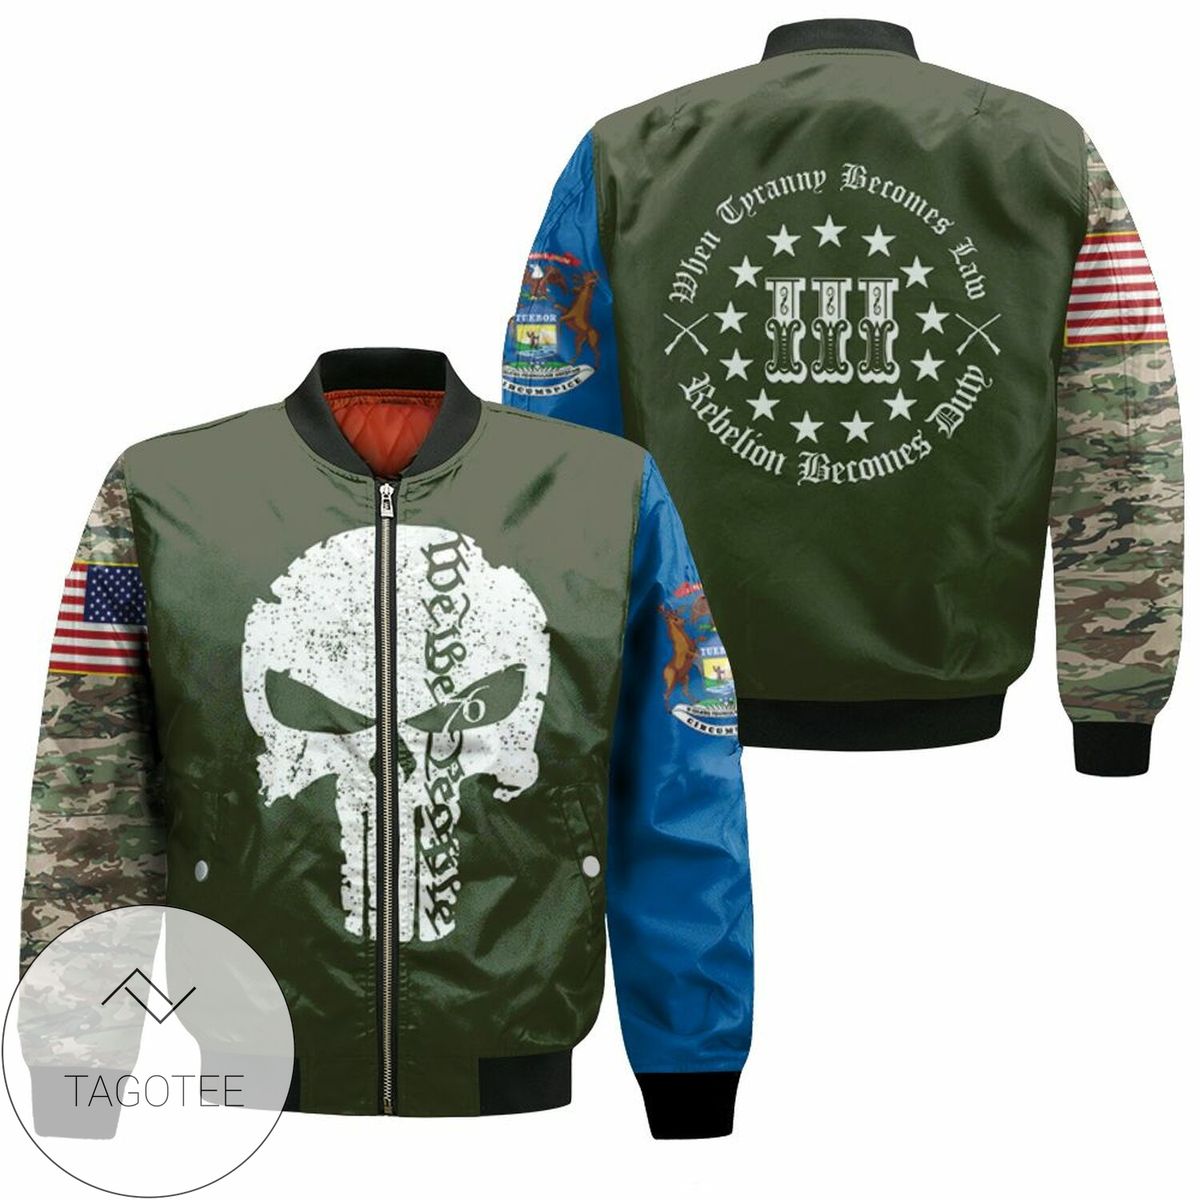 The Punisher When Tyranny Becomes Law Rebelion Becomes Duty 3D T Shirt Hoodie Sweater Bomber Jacket